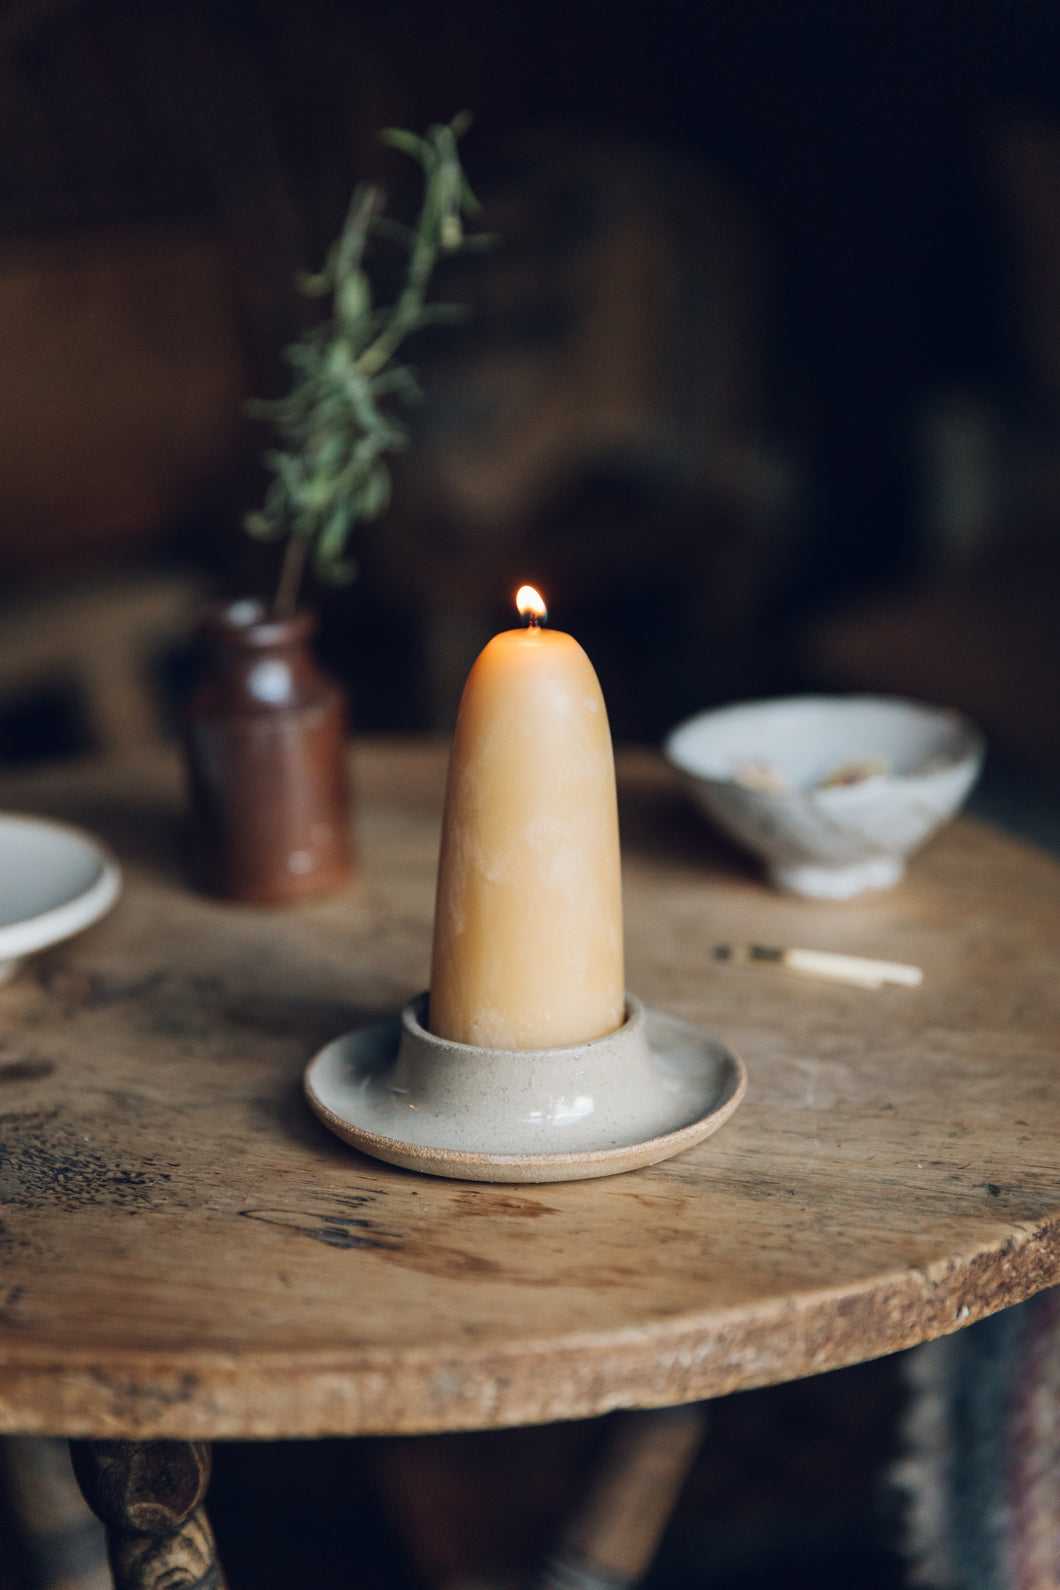 SETTLE - a gently lit chunky candle made from golden beeswax sits comfortably on an artisan ceramic candleholder, on an antique timber table in one of Settle's luxury retreats.  